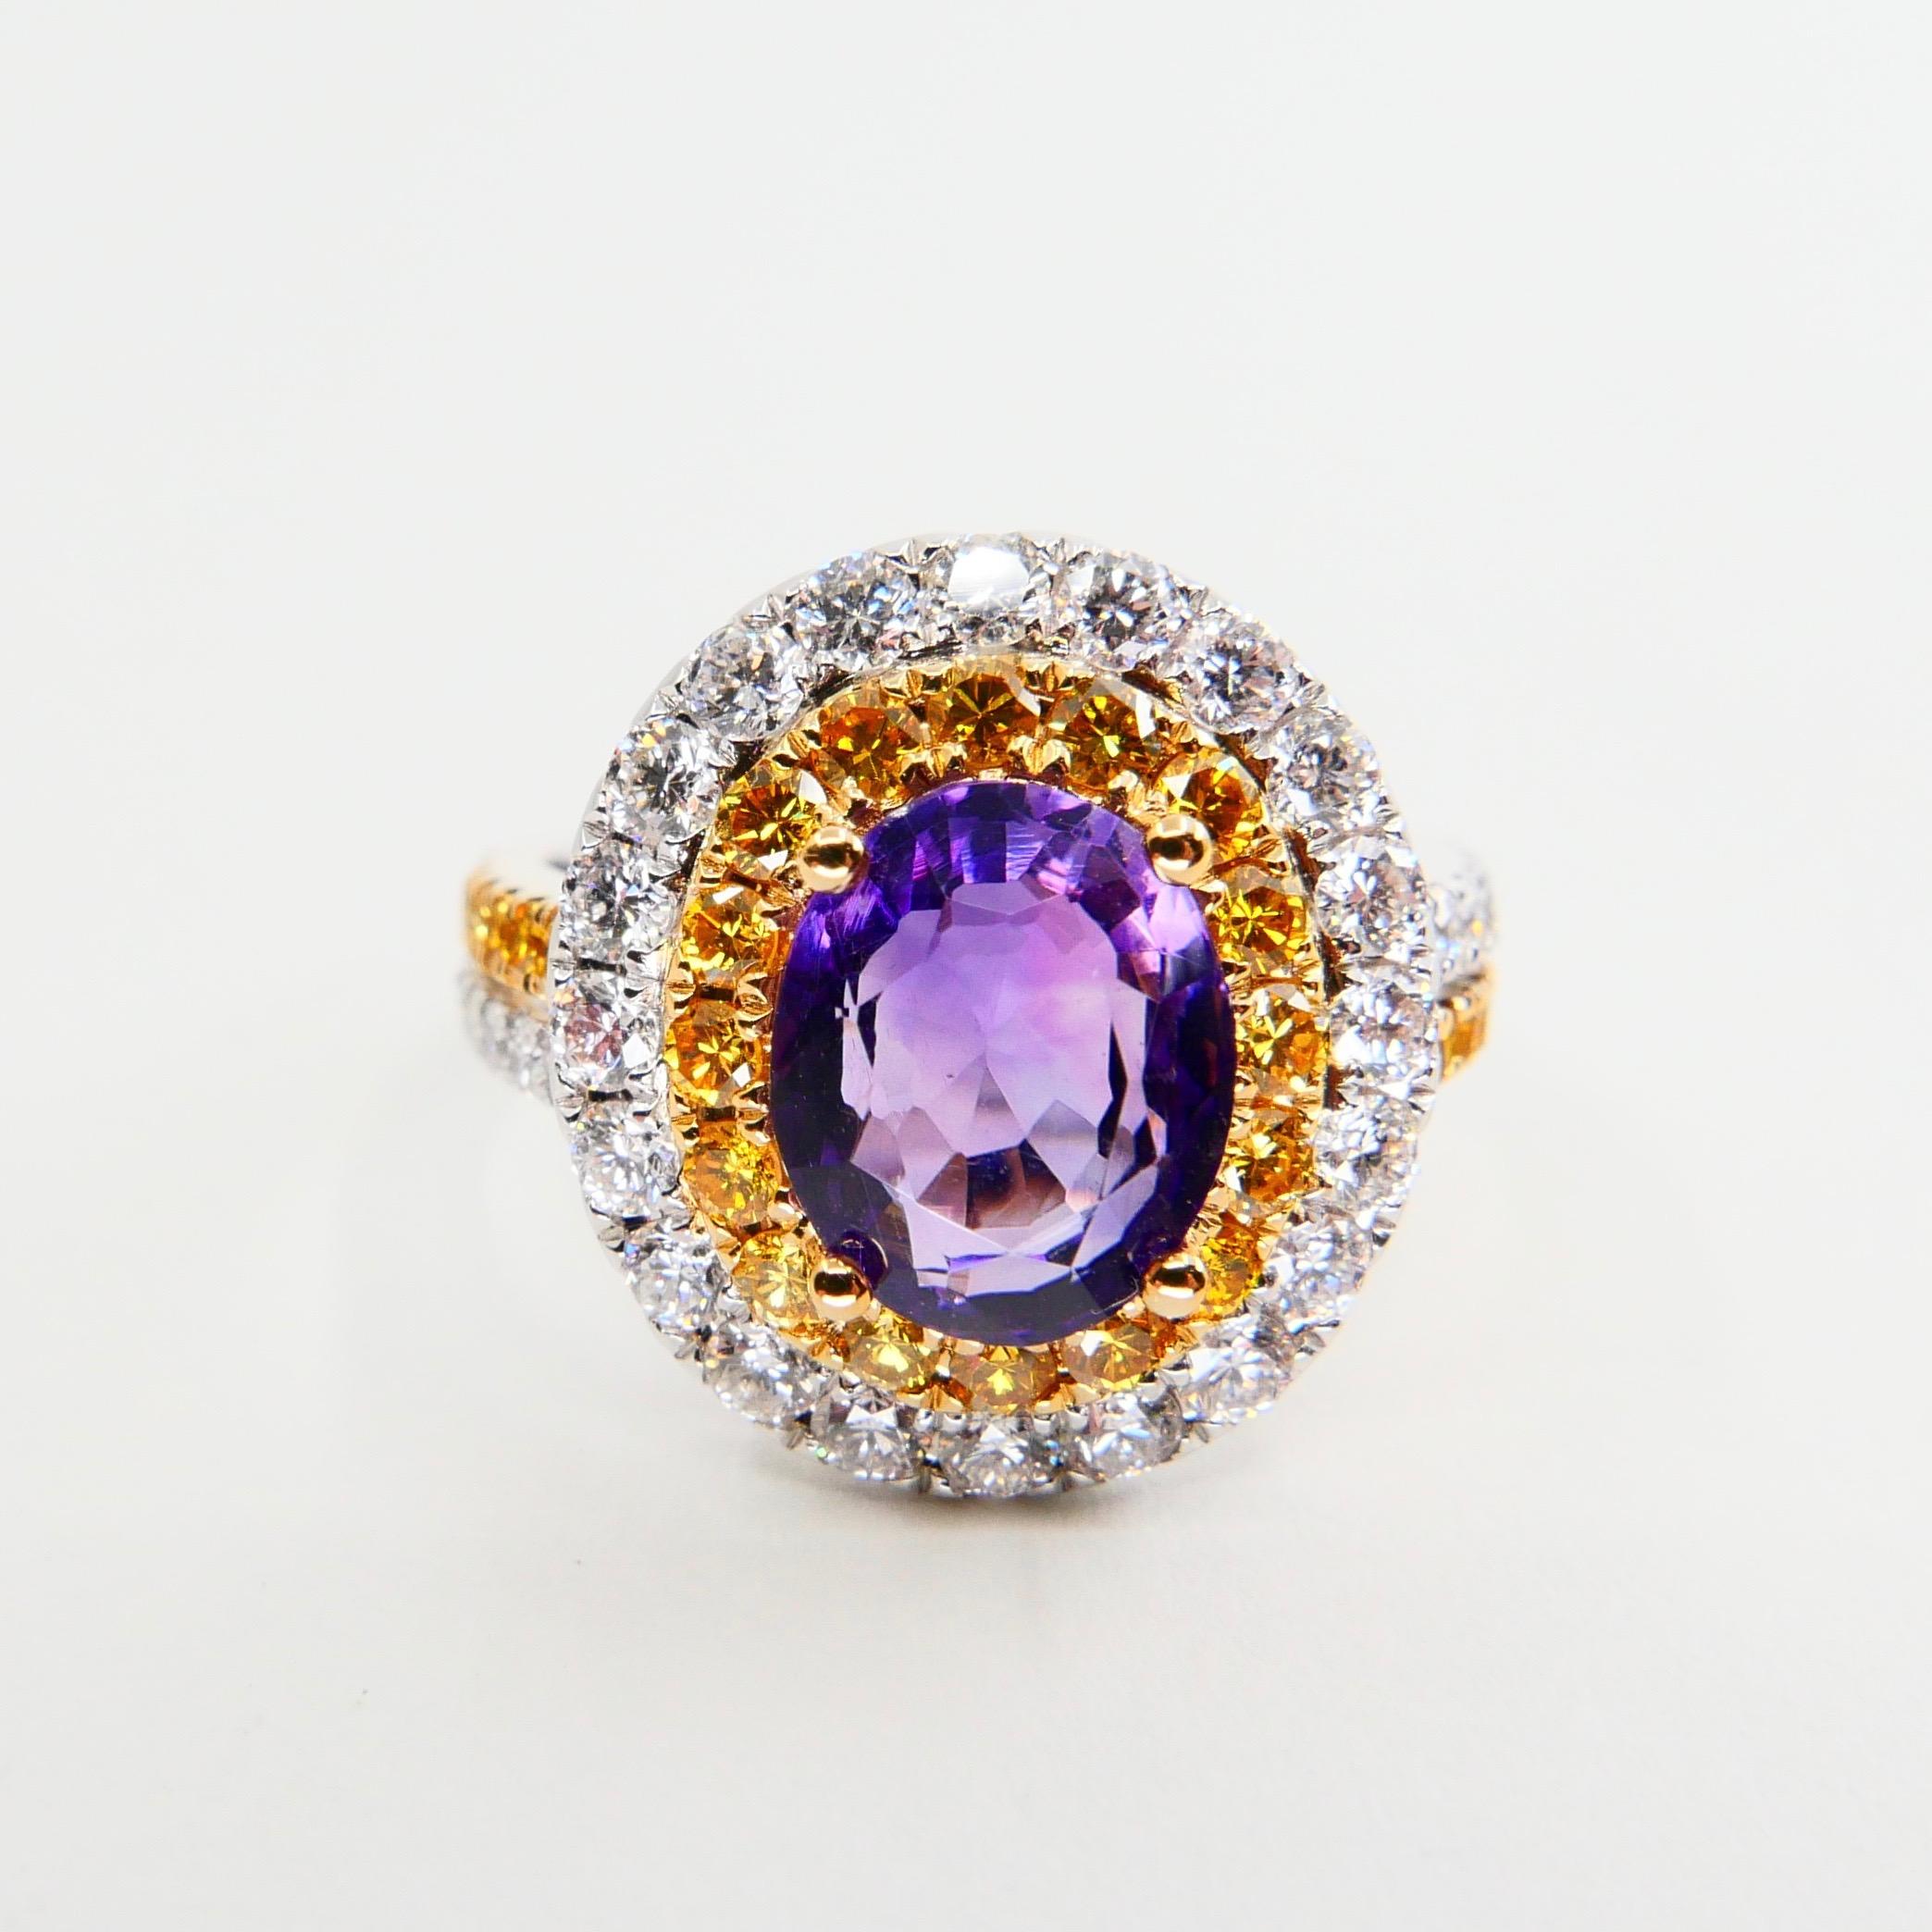 18k White Gold Amethyst Cocktail Ring with Fancy Vivid Yellow and White Diamonds 2